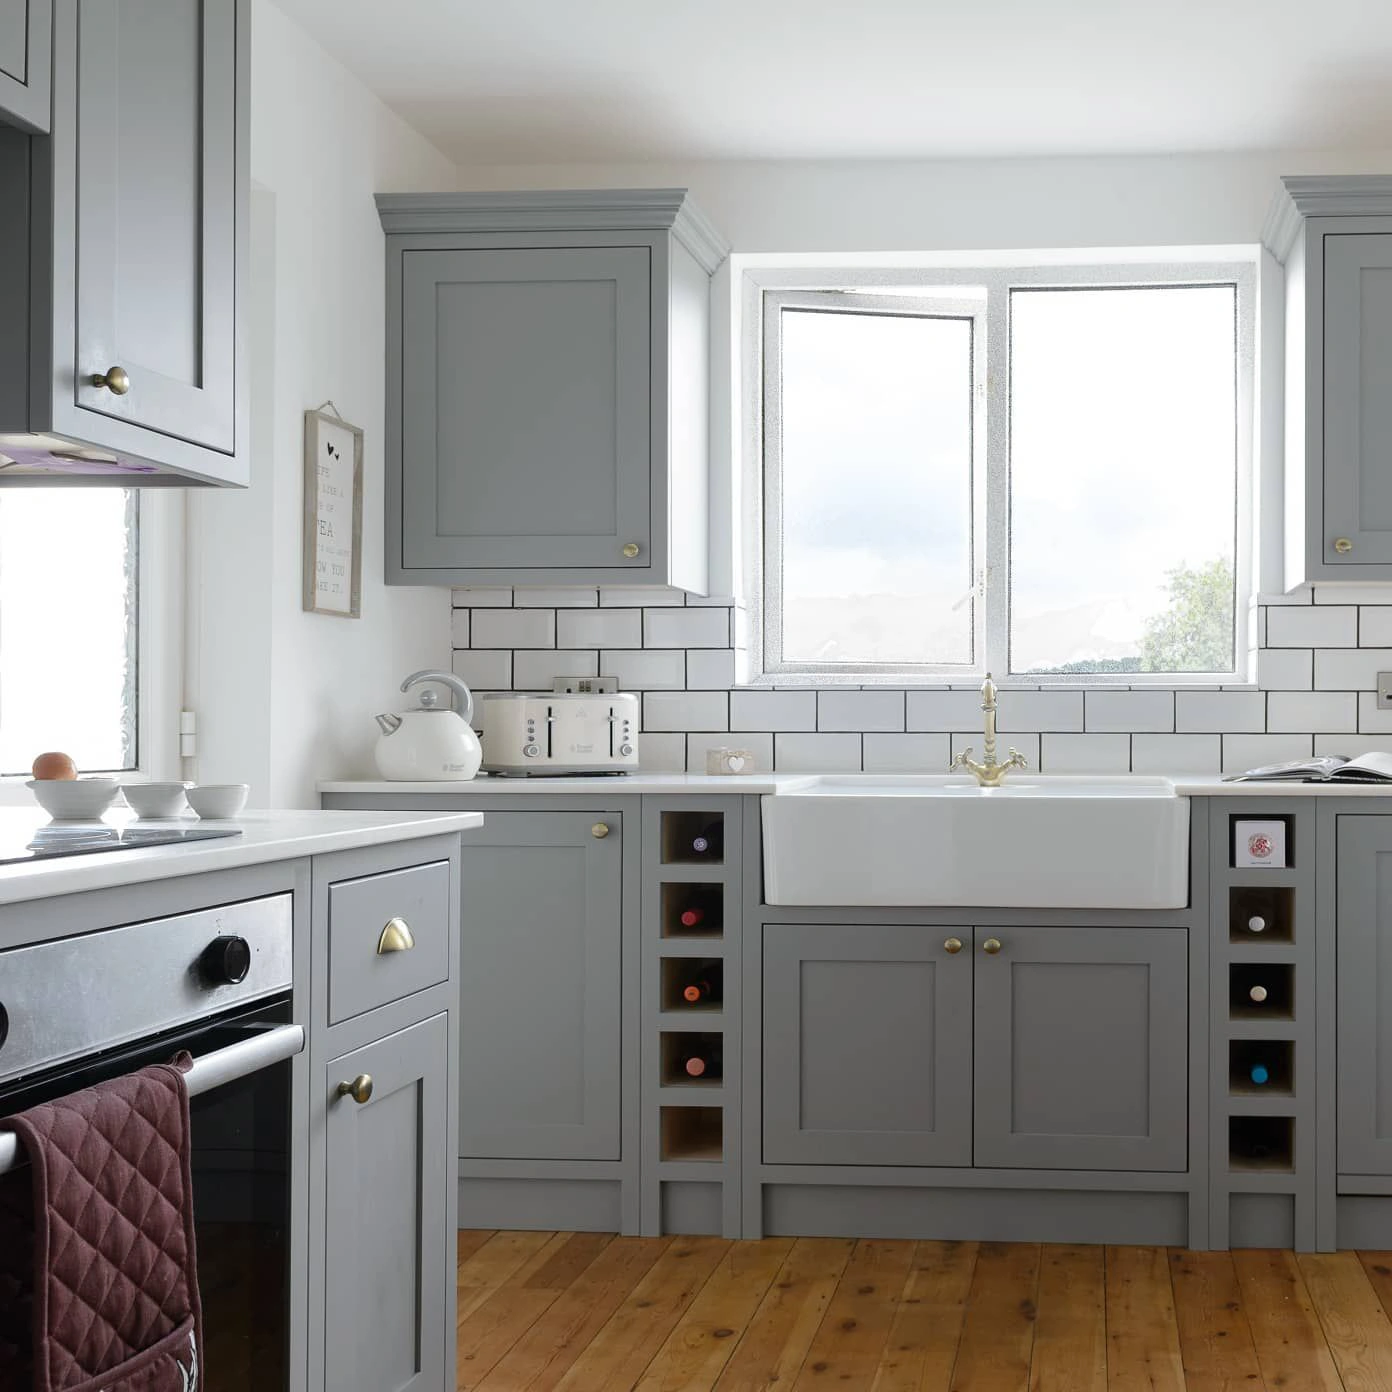 Farrow and Ball Manor House Gray 265 kitchen cabinets